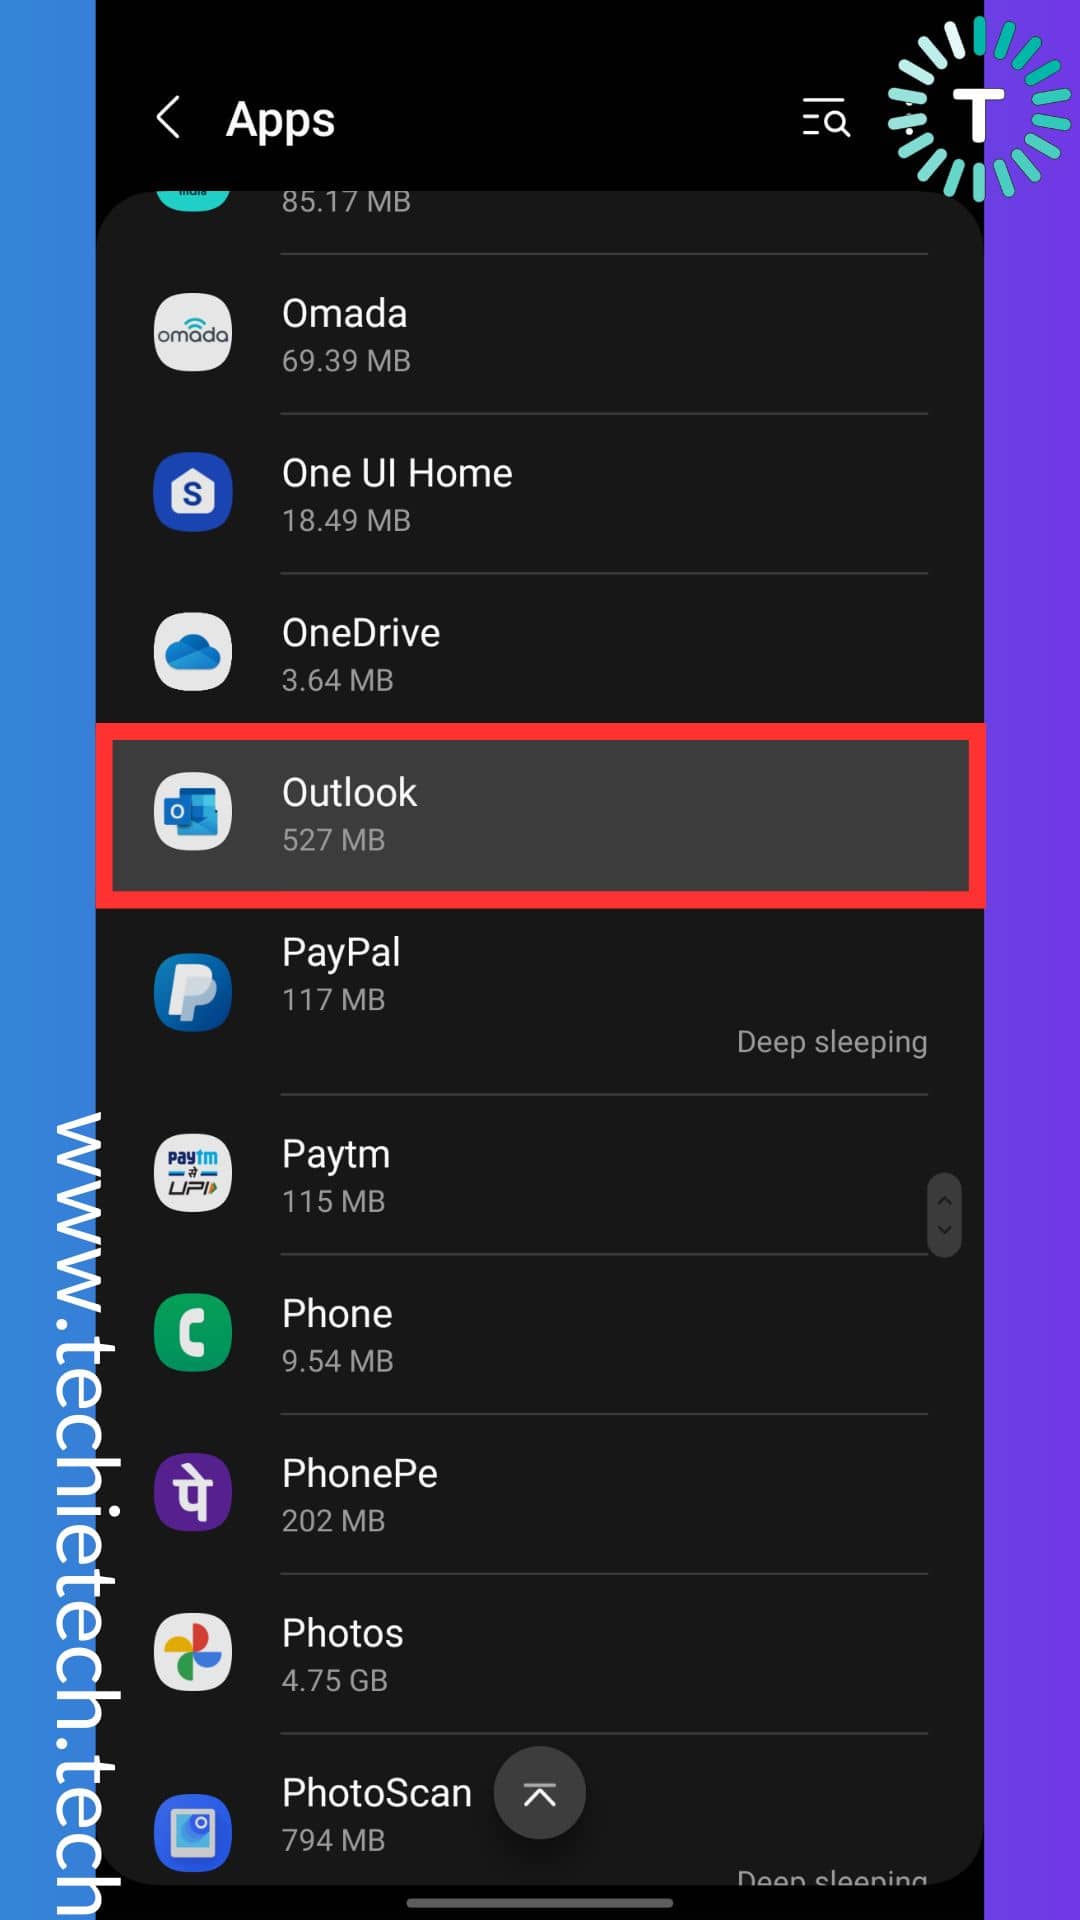 Find Microsoft Outlook and tap on it